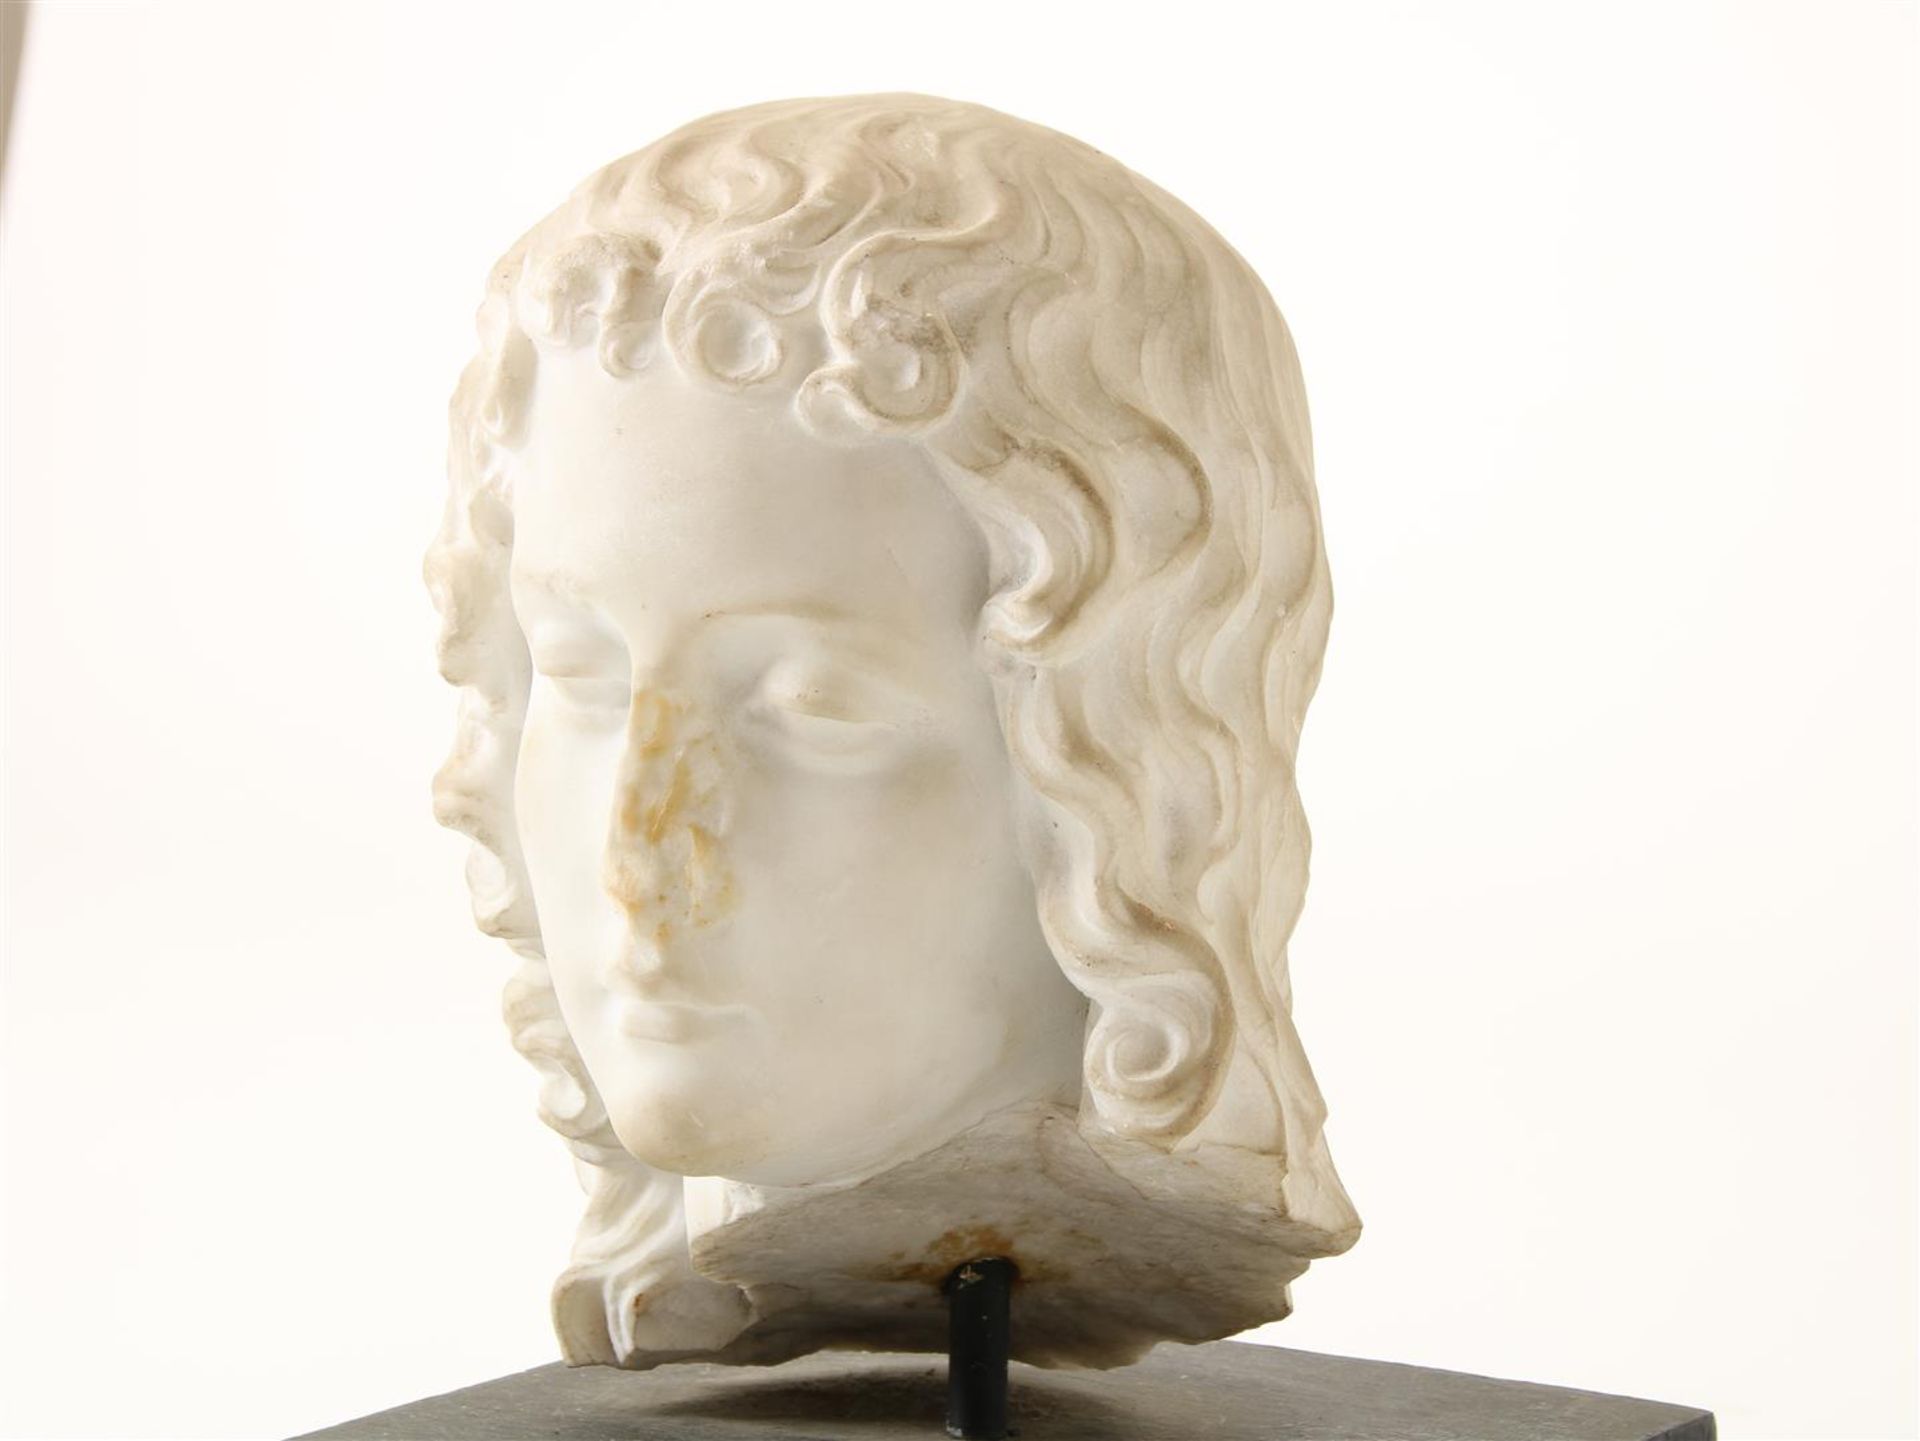 Marble bust of goddess, mounted on wooden base, height 25 cm. - Image 3 of 3